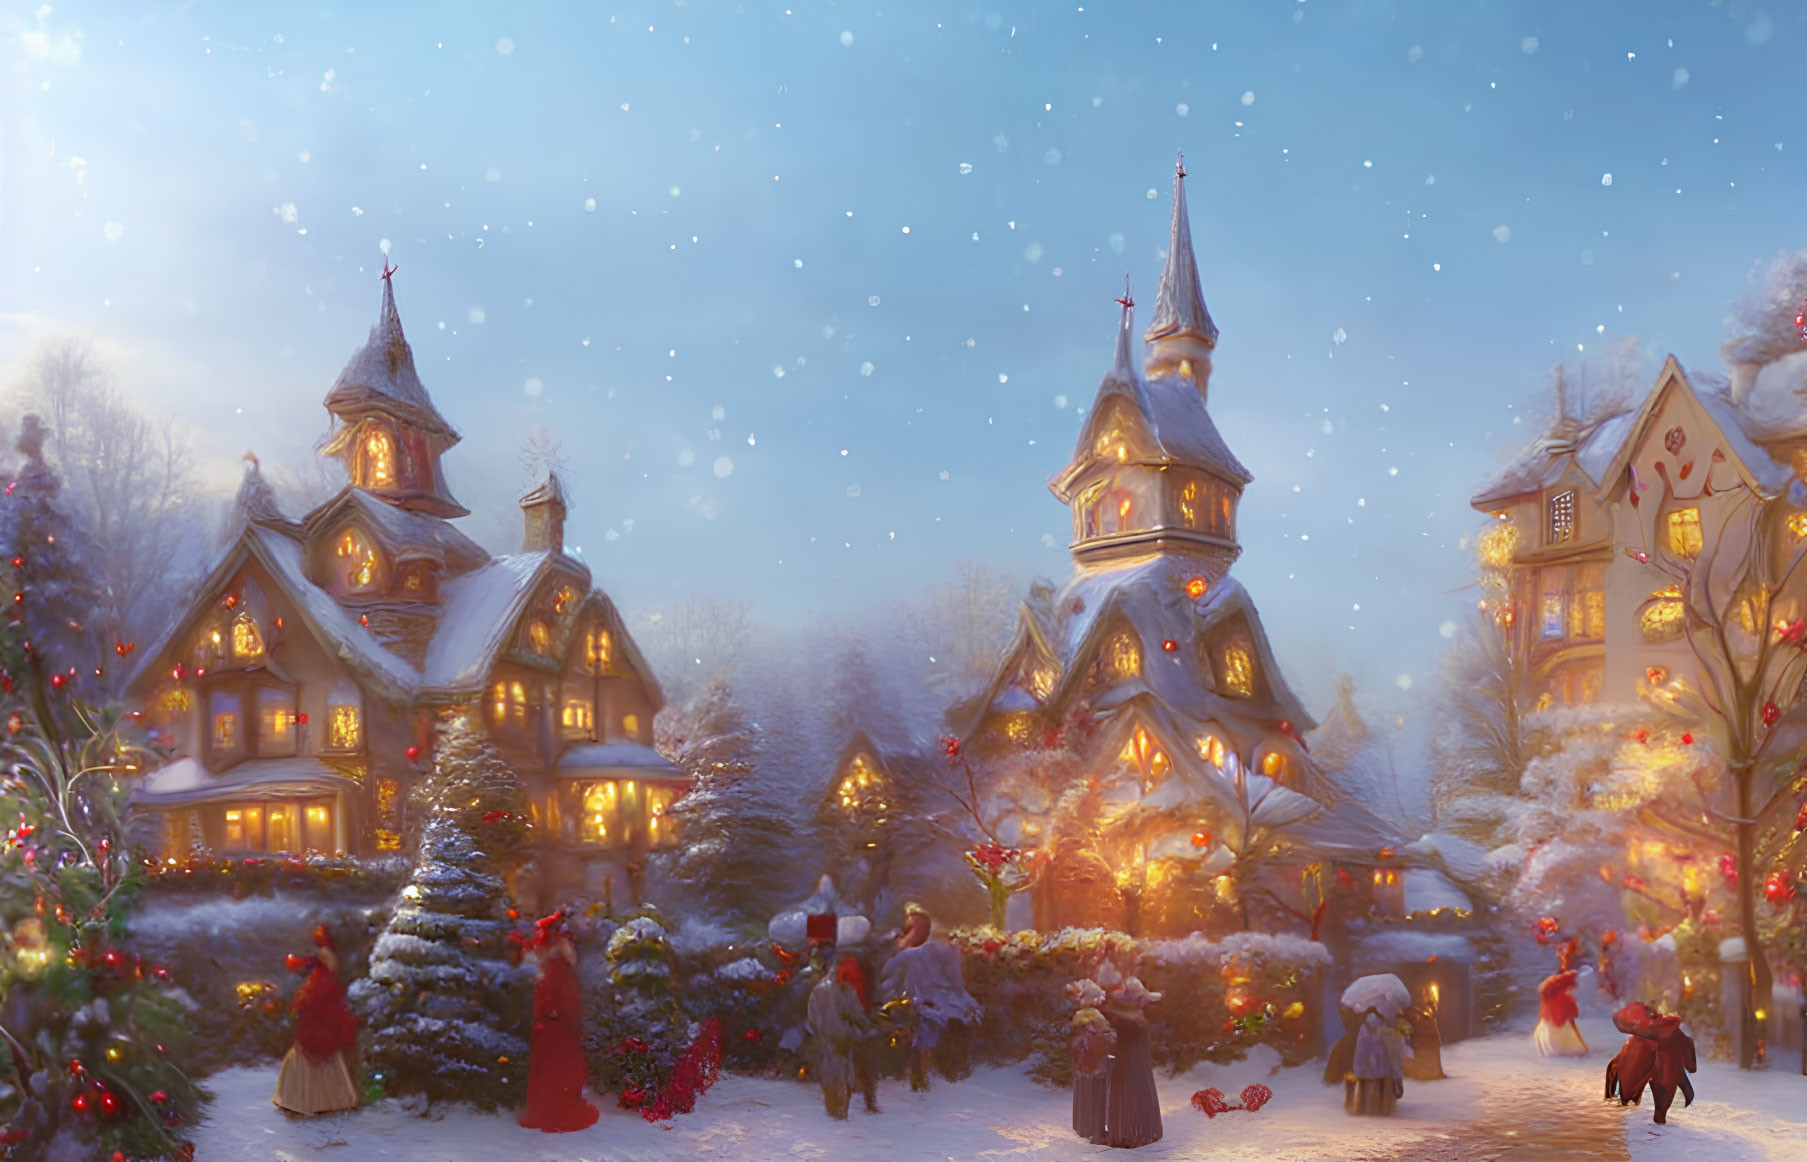 Snow-covered winter village scene with illuminated Christmas trees and strolling figures